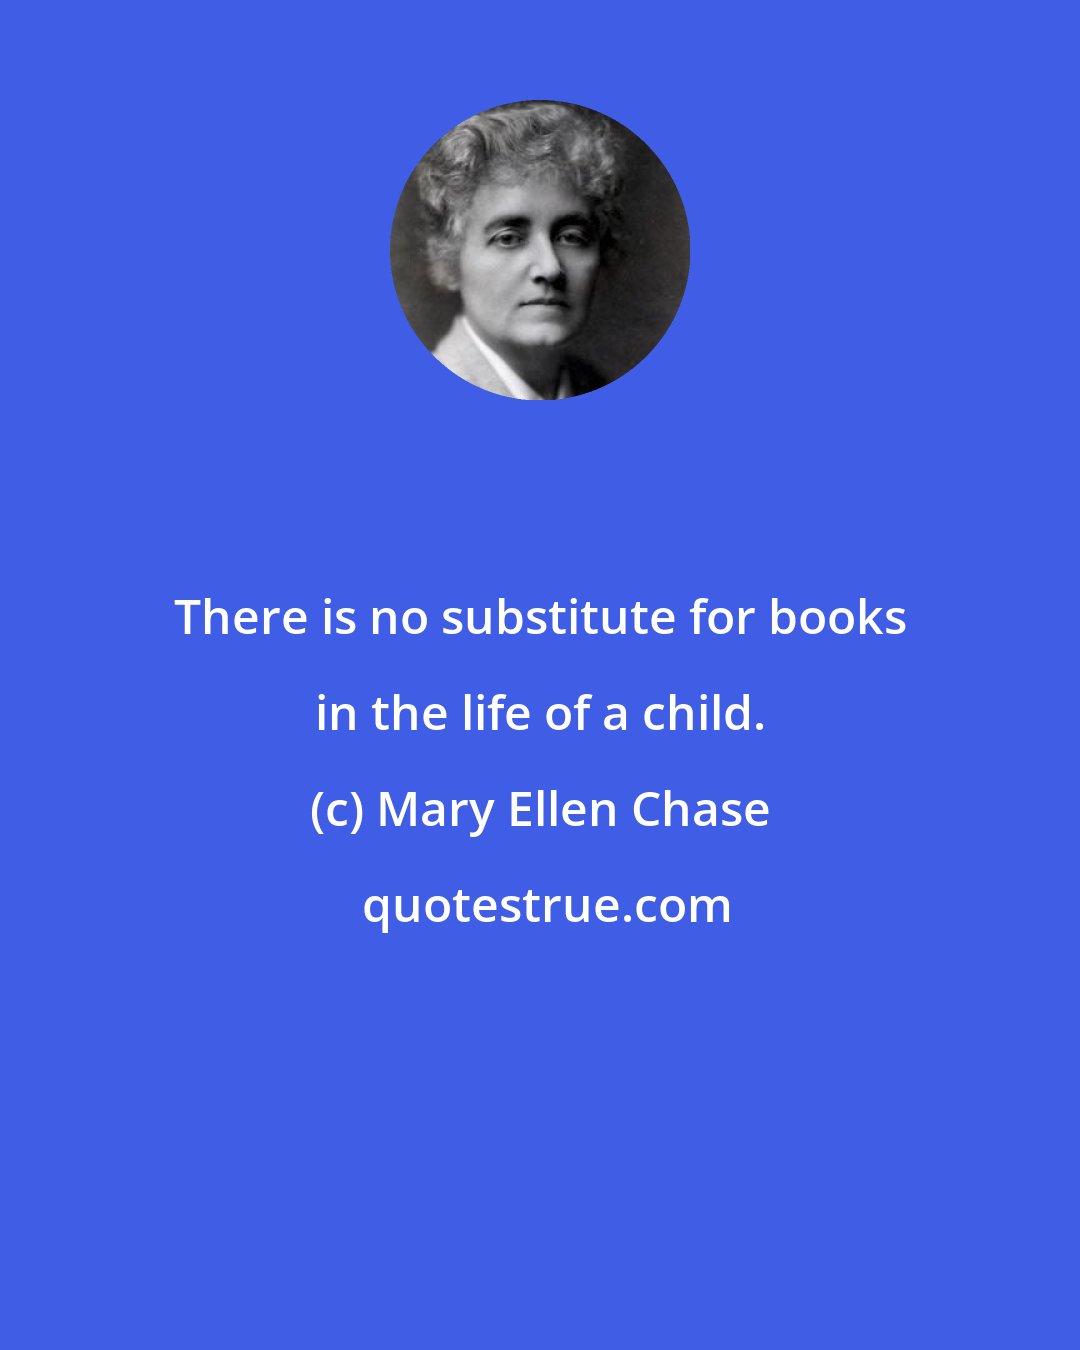 Mary Ellen Chase: There is no substitute for books in the life of a child.